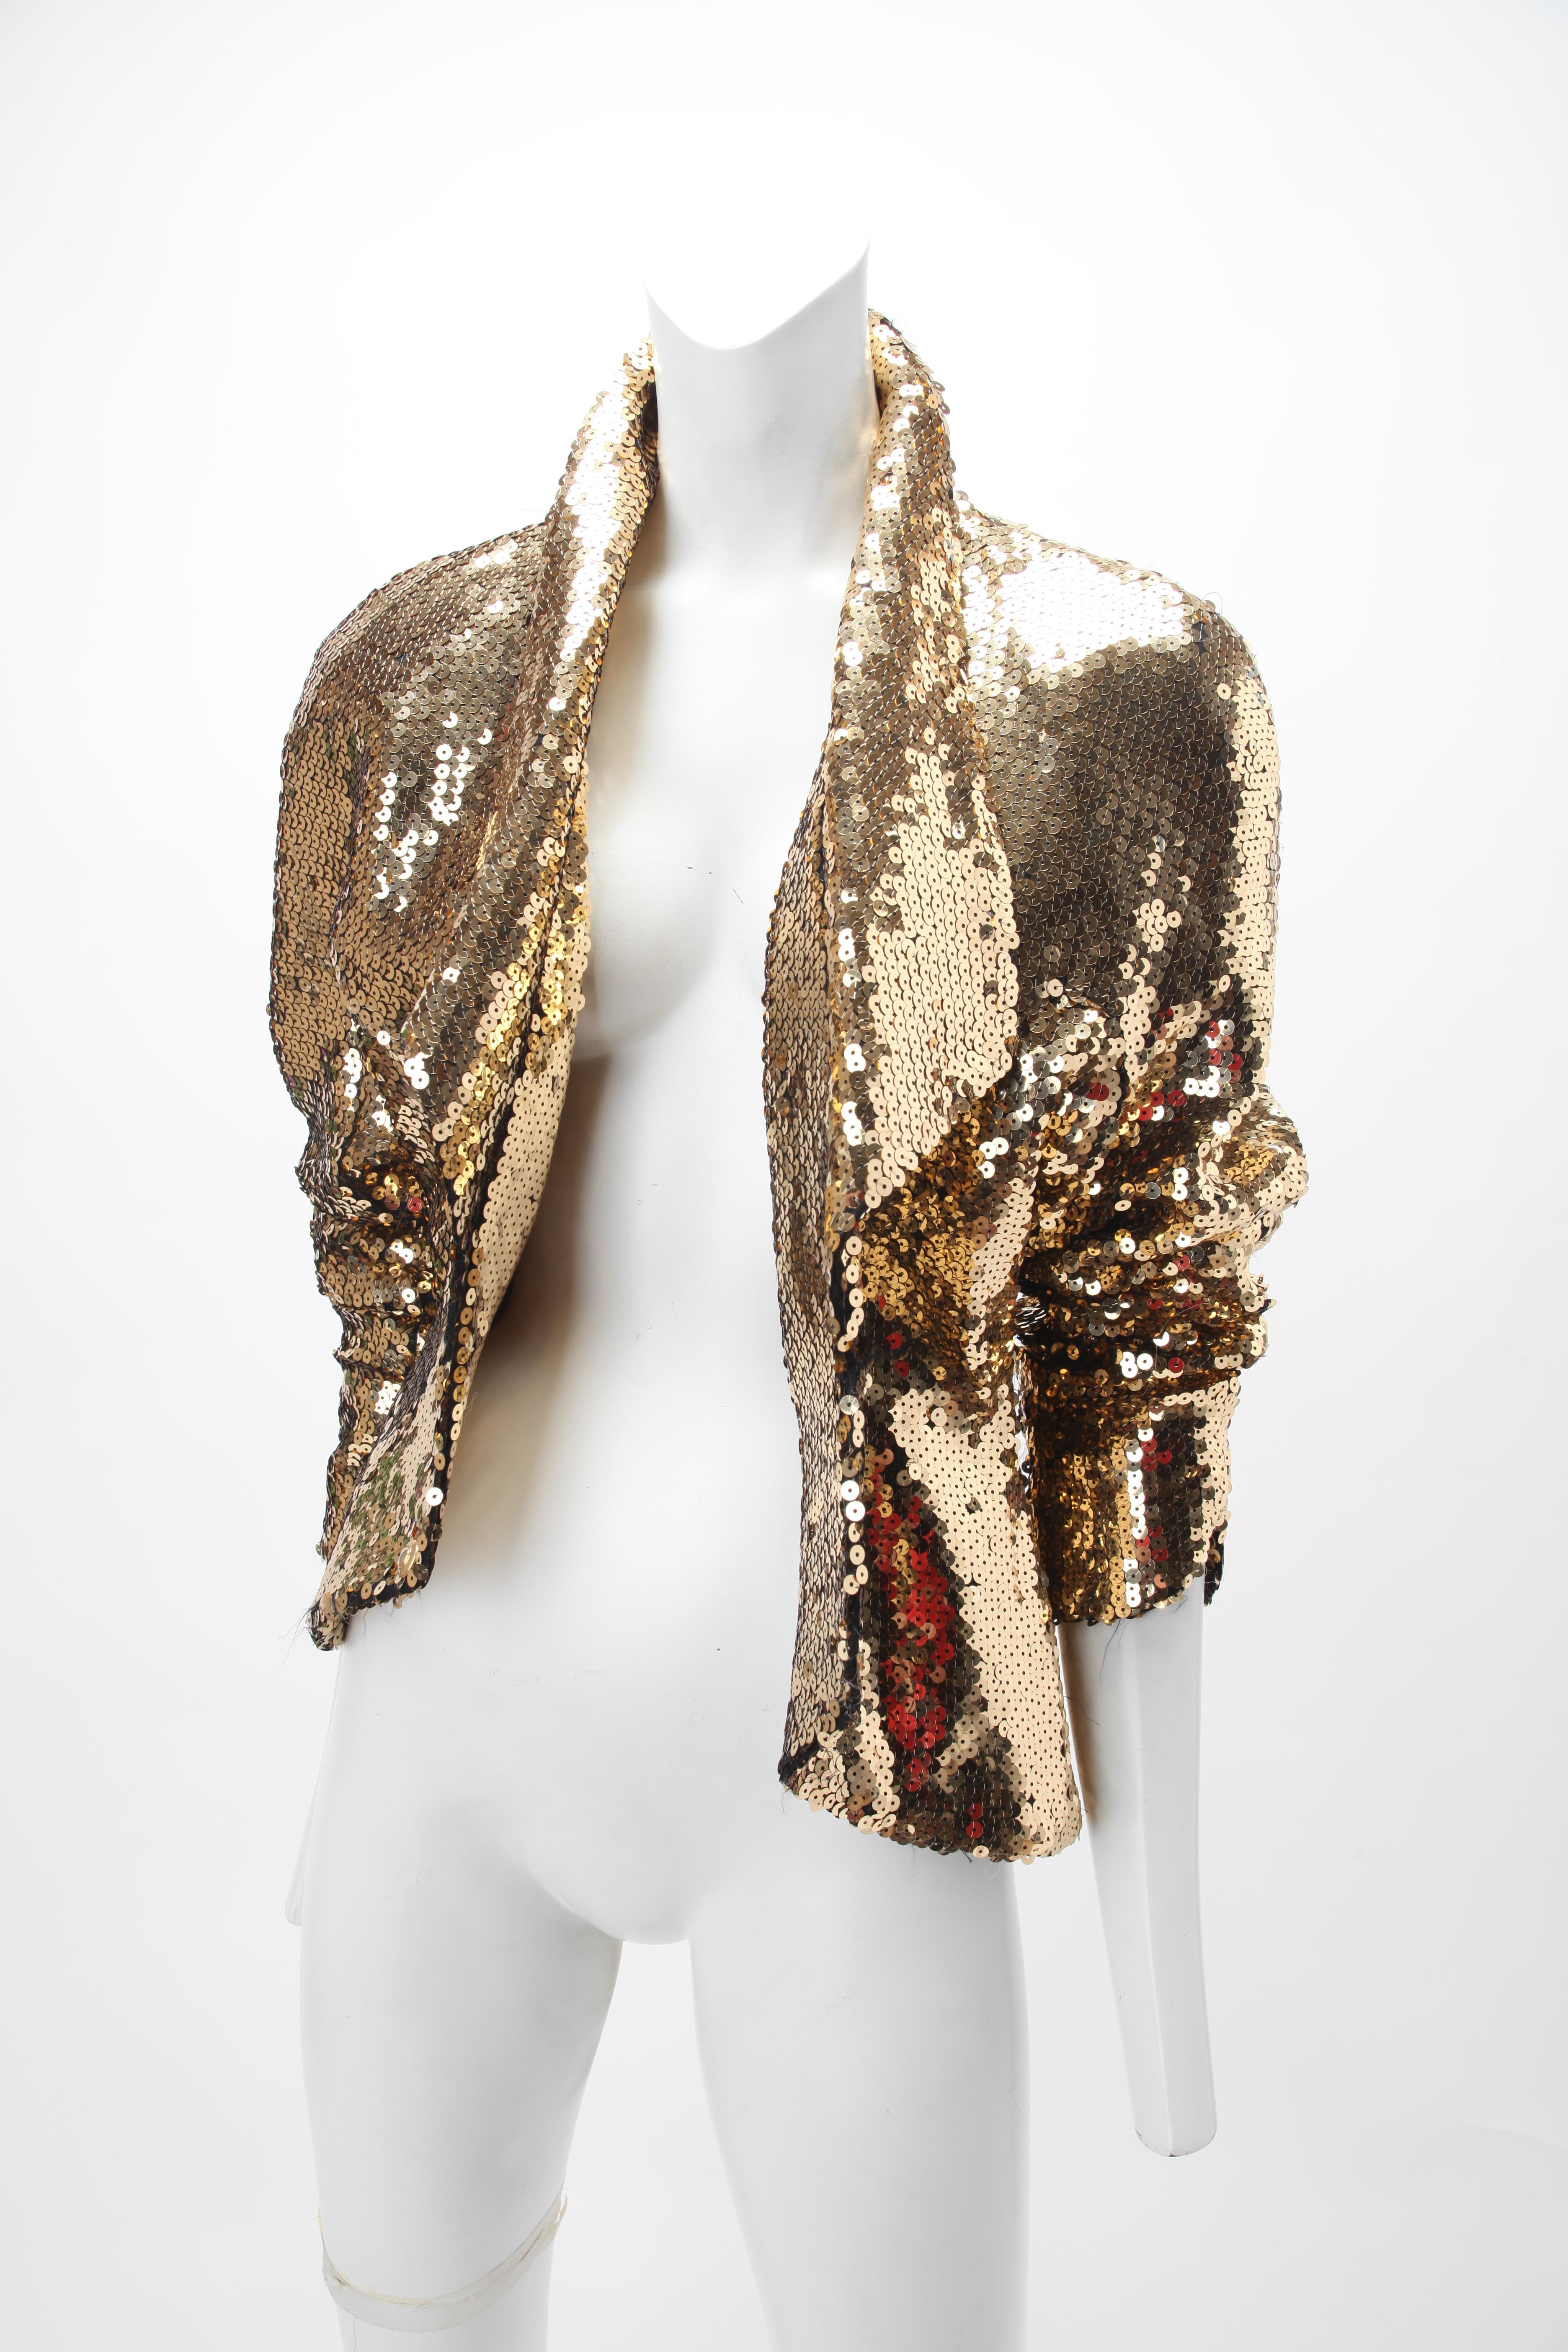 1980s Thierry Mugler Gold Sequin Jacket; Fitted jacket with lapels, gathered at waist with three gold metal snap closures; Dolman sleeves with notch at cuffs; Fully lined. Labeled Thierry Mugler Paris. Size 40. Fits US size 4. Some sequin loss which